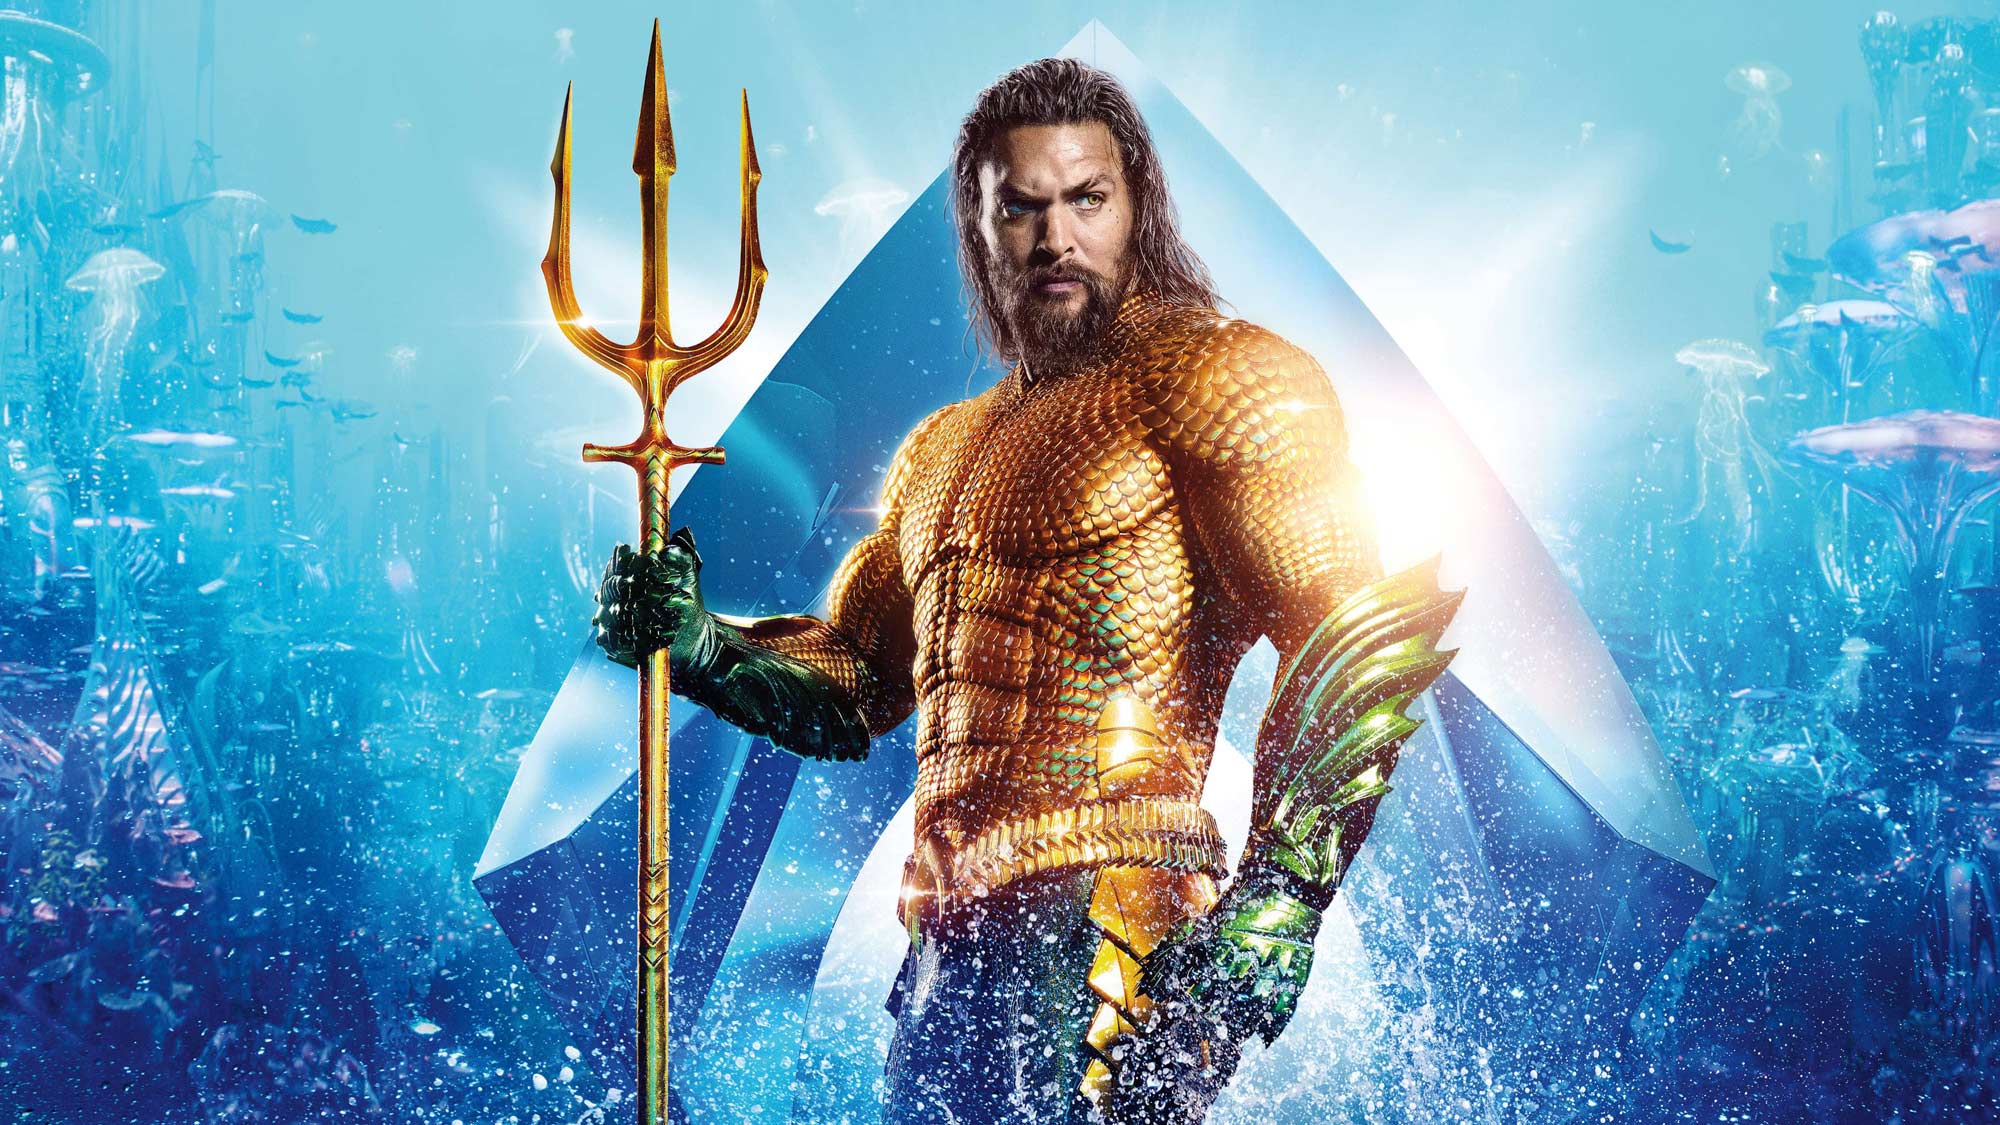 Blonde Hair Rumored for New Aquaman Character in Sequel - wide 7